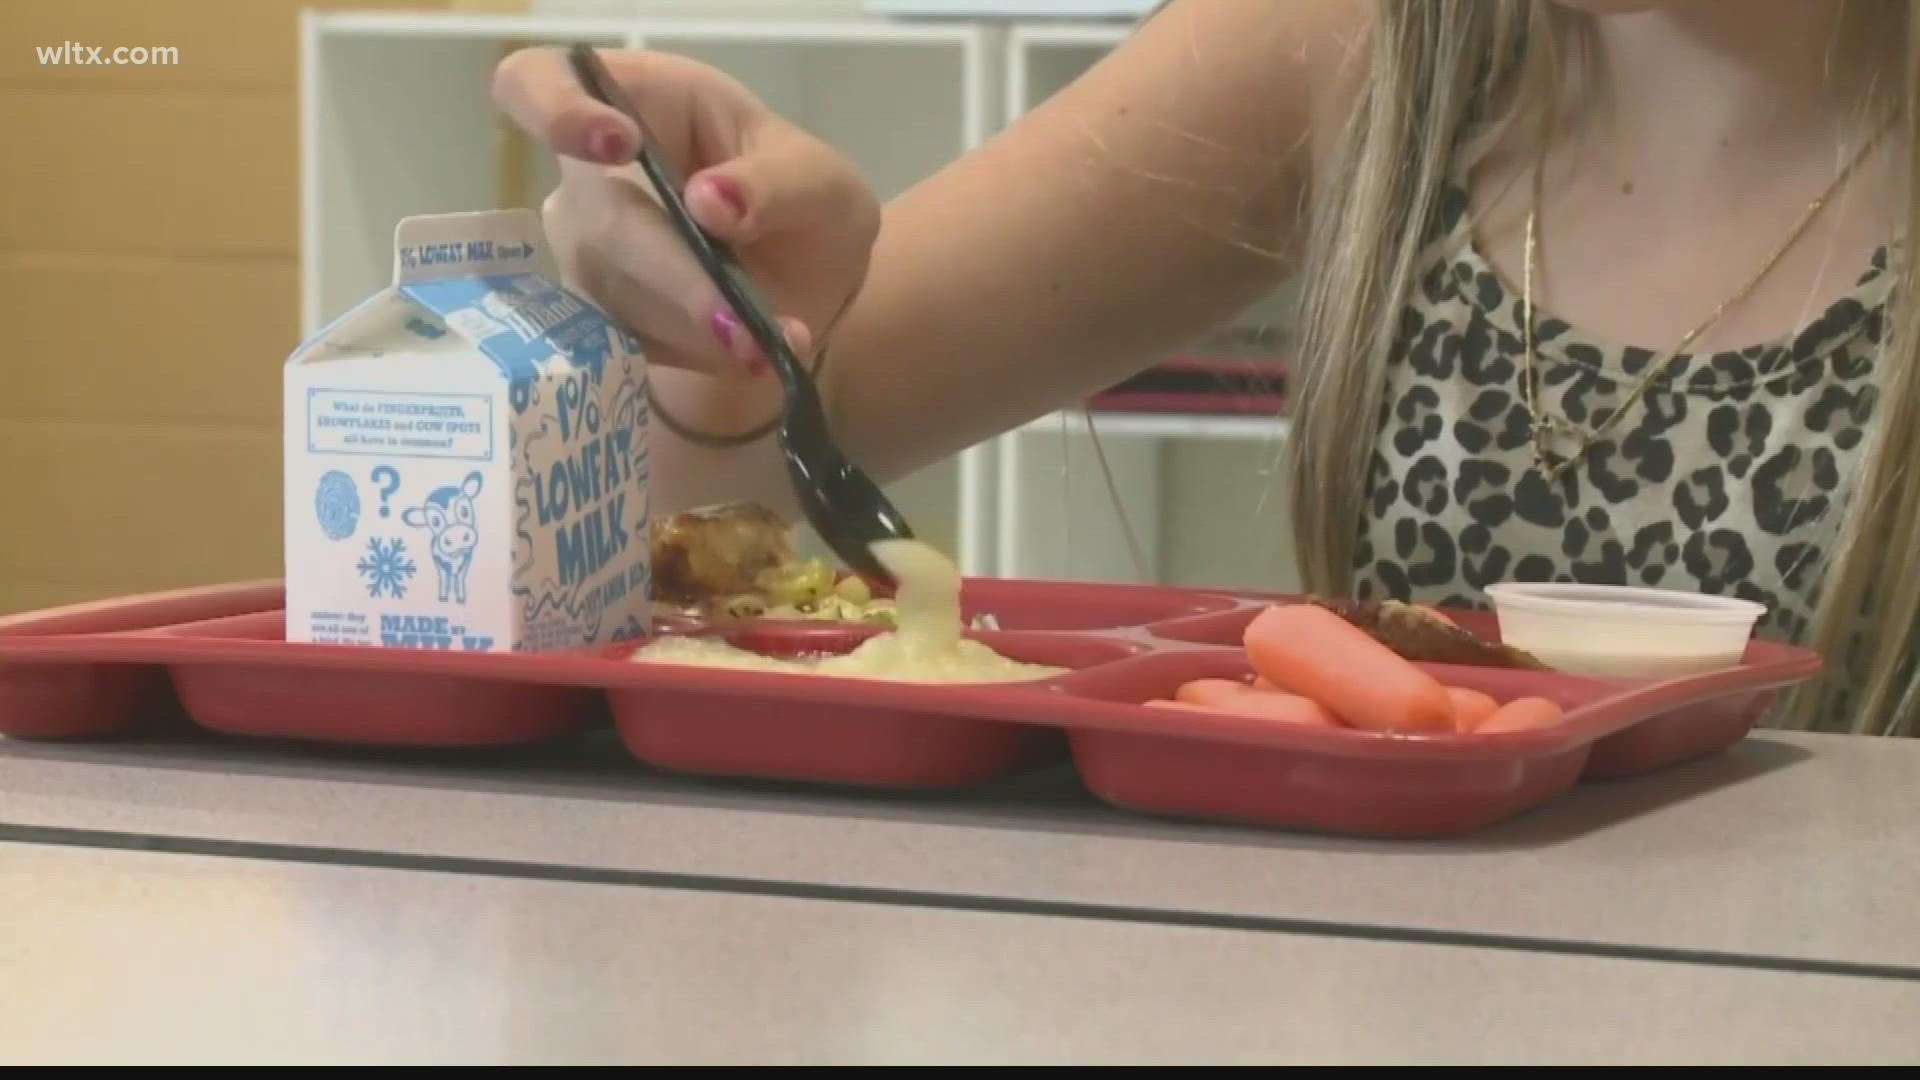 Richland Two school district sent an email to parents that students will be denied lunch if their meal debt is $10.